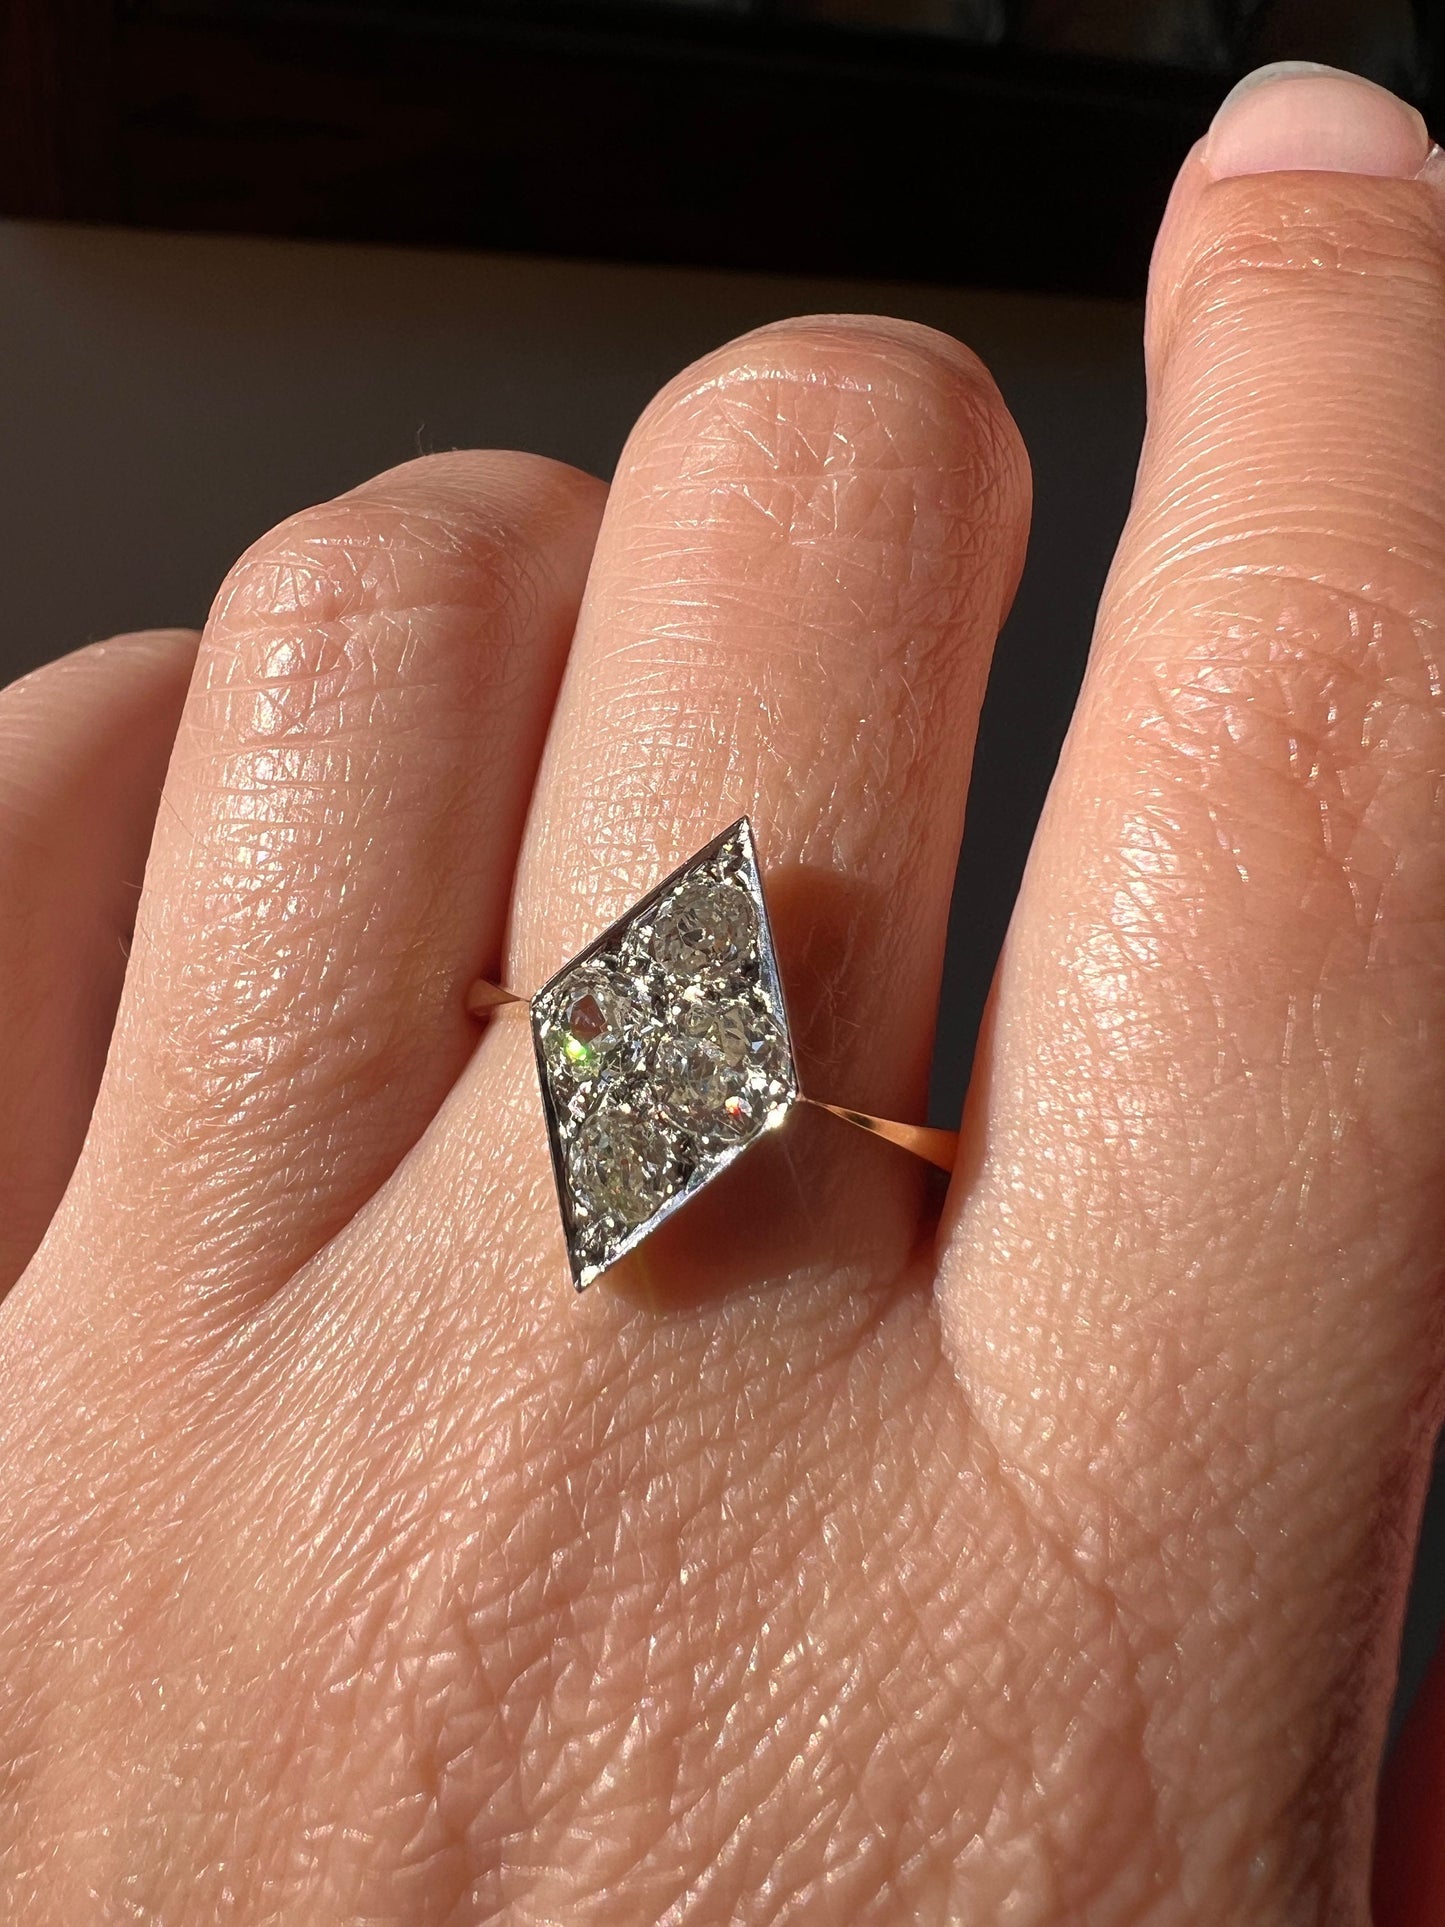 Four Stone KITE .9 Carat Old Mine Cut Diamond Cluster Grid Ring French Antique 18k Gold Geometric Stacker Cobblestone Texture Romantic Gift